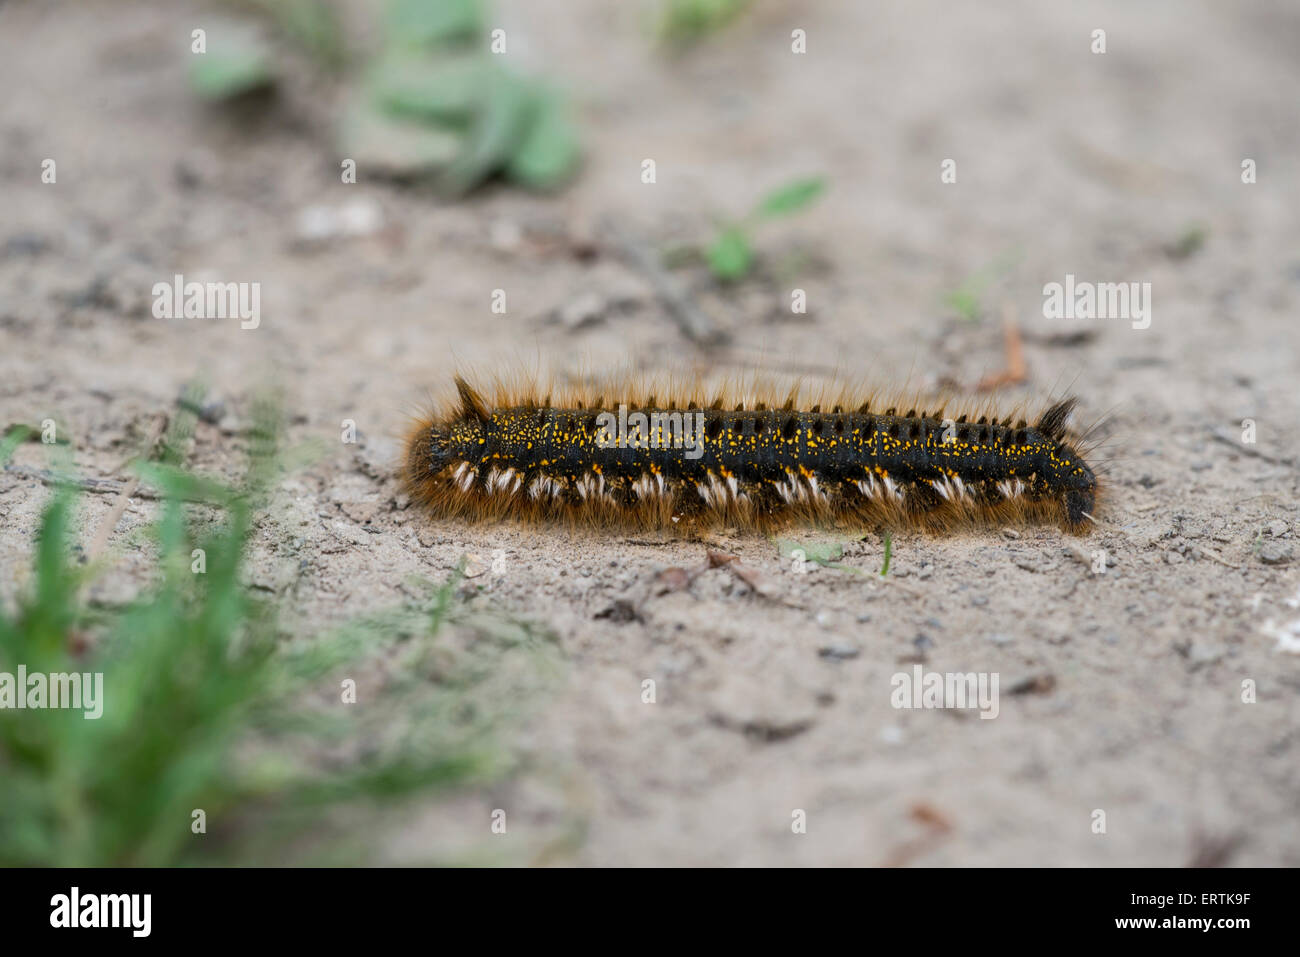 Drinker moth (Philudoria potatoria). Late instar caterpillar searching for a place to pupate. Stock Photo